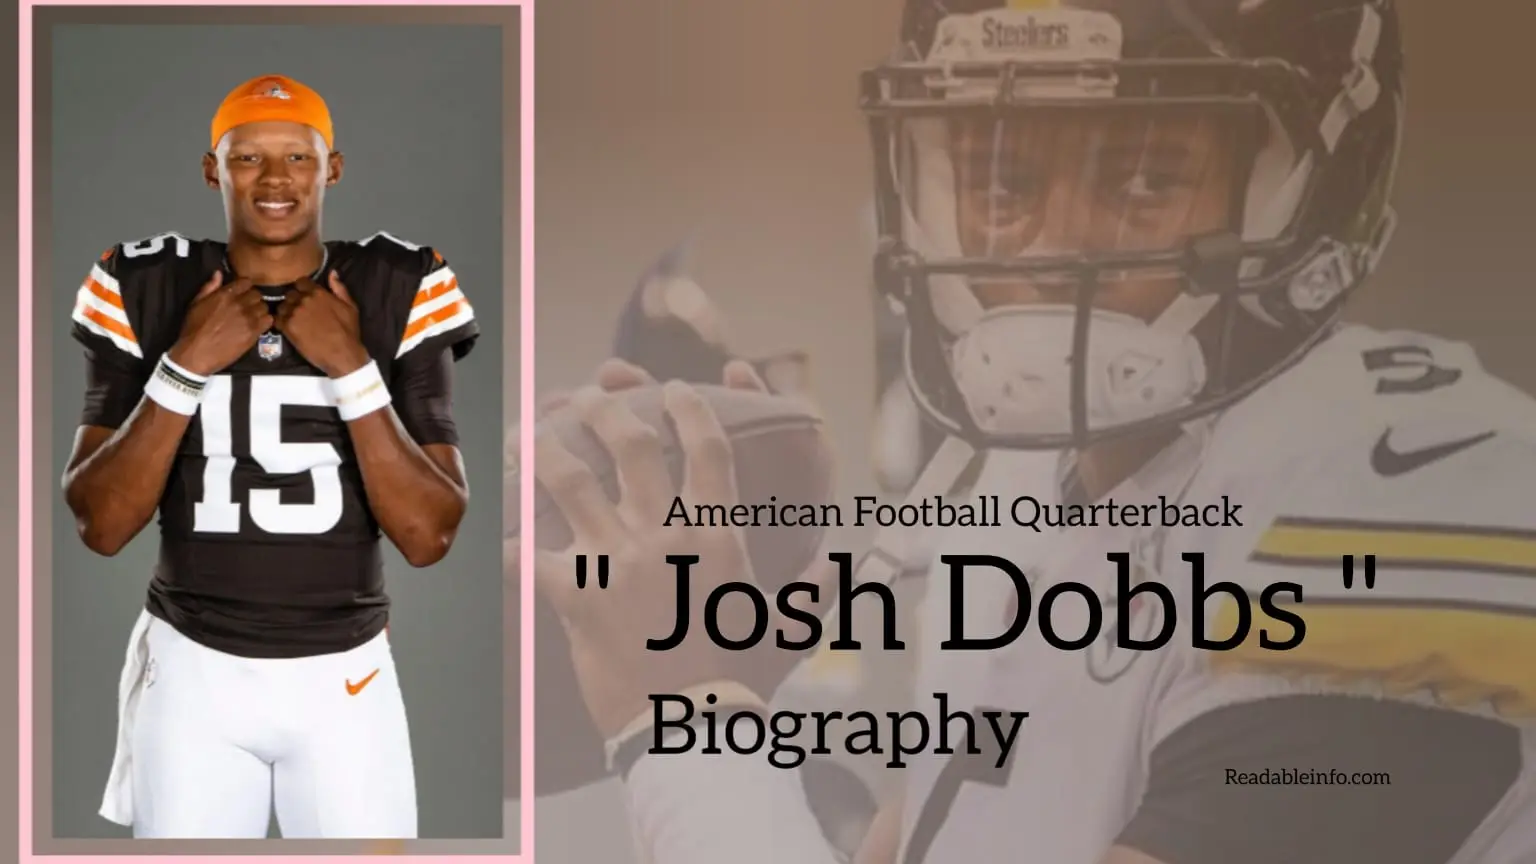 You are currently viewing Josh Dobbs Biography (American Football Quarterback)